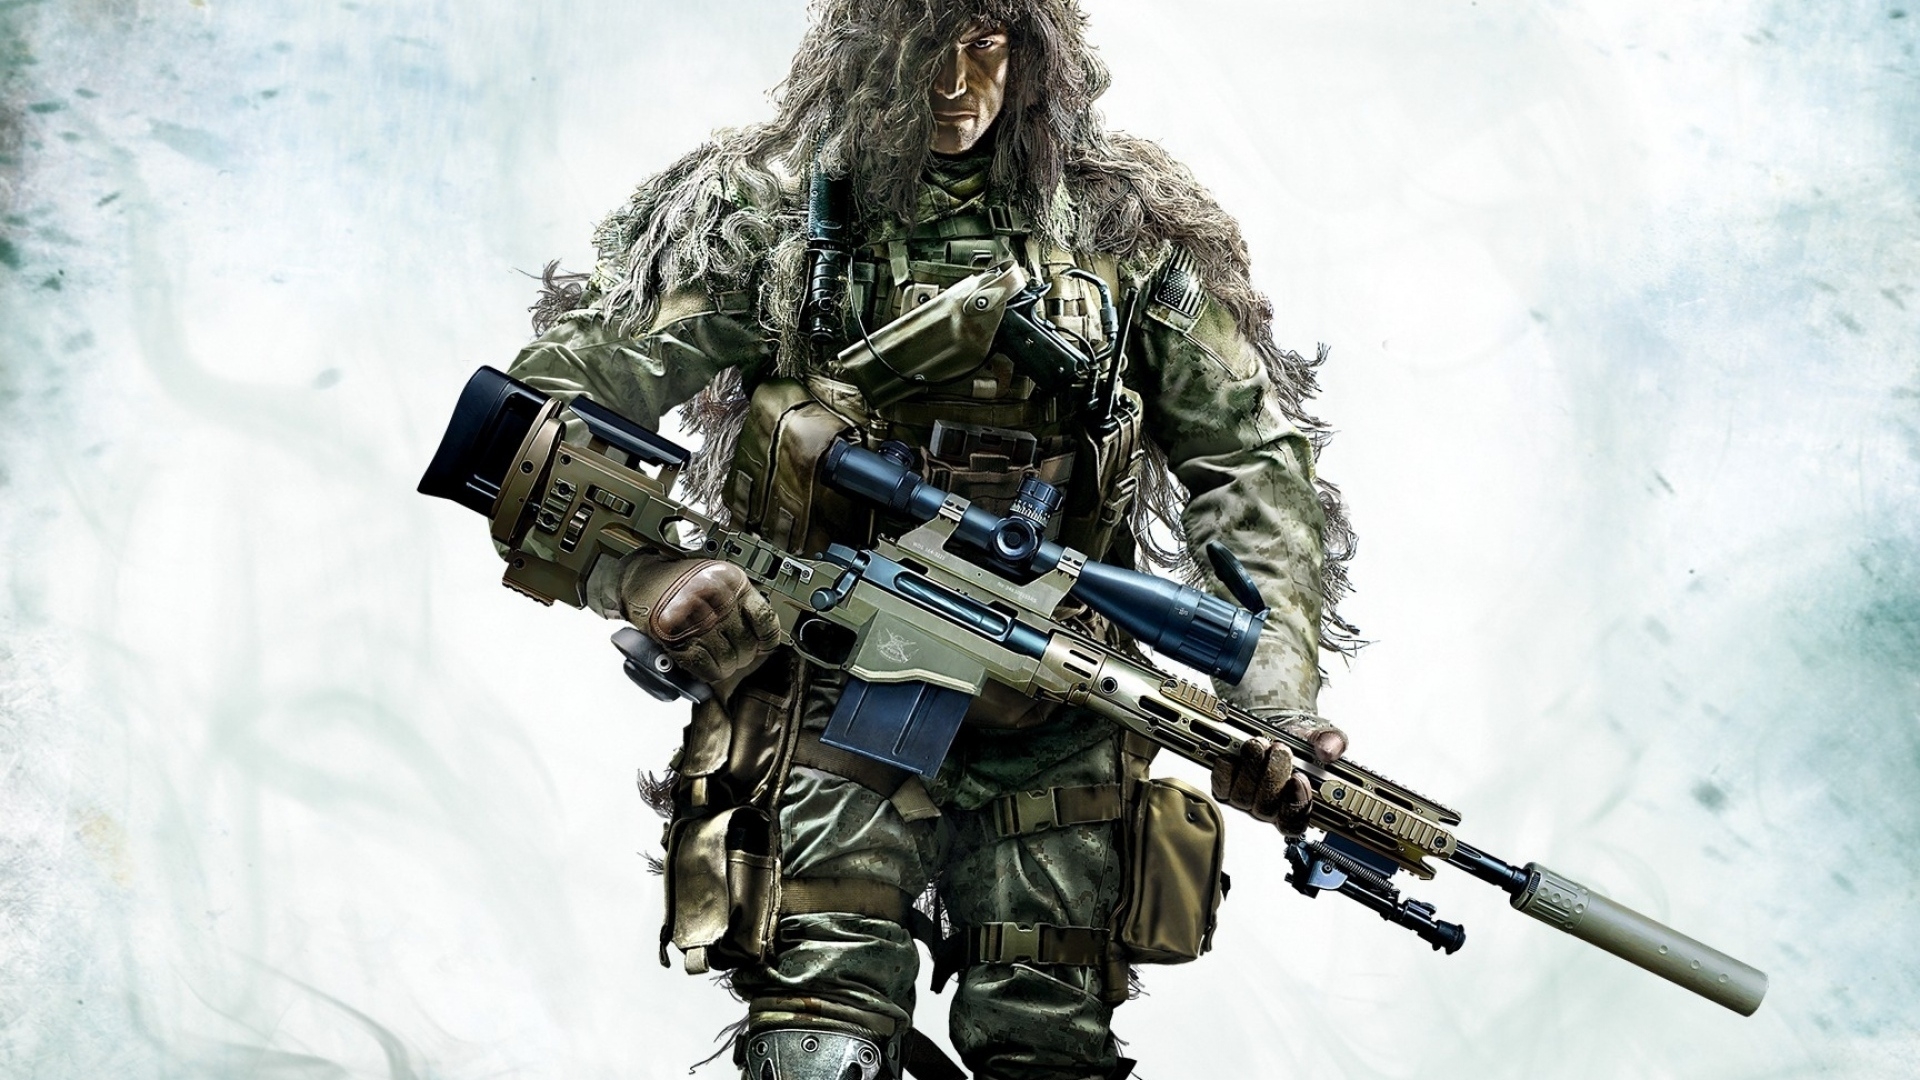 Sniper Ghost Warrior 2 Camouflage for 1920 x 1080 HDTV 1080p resolution